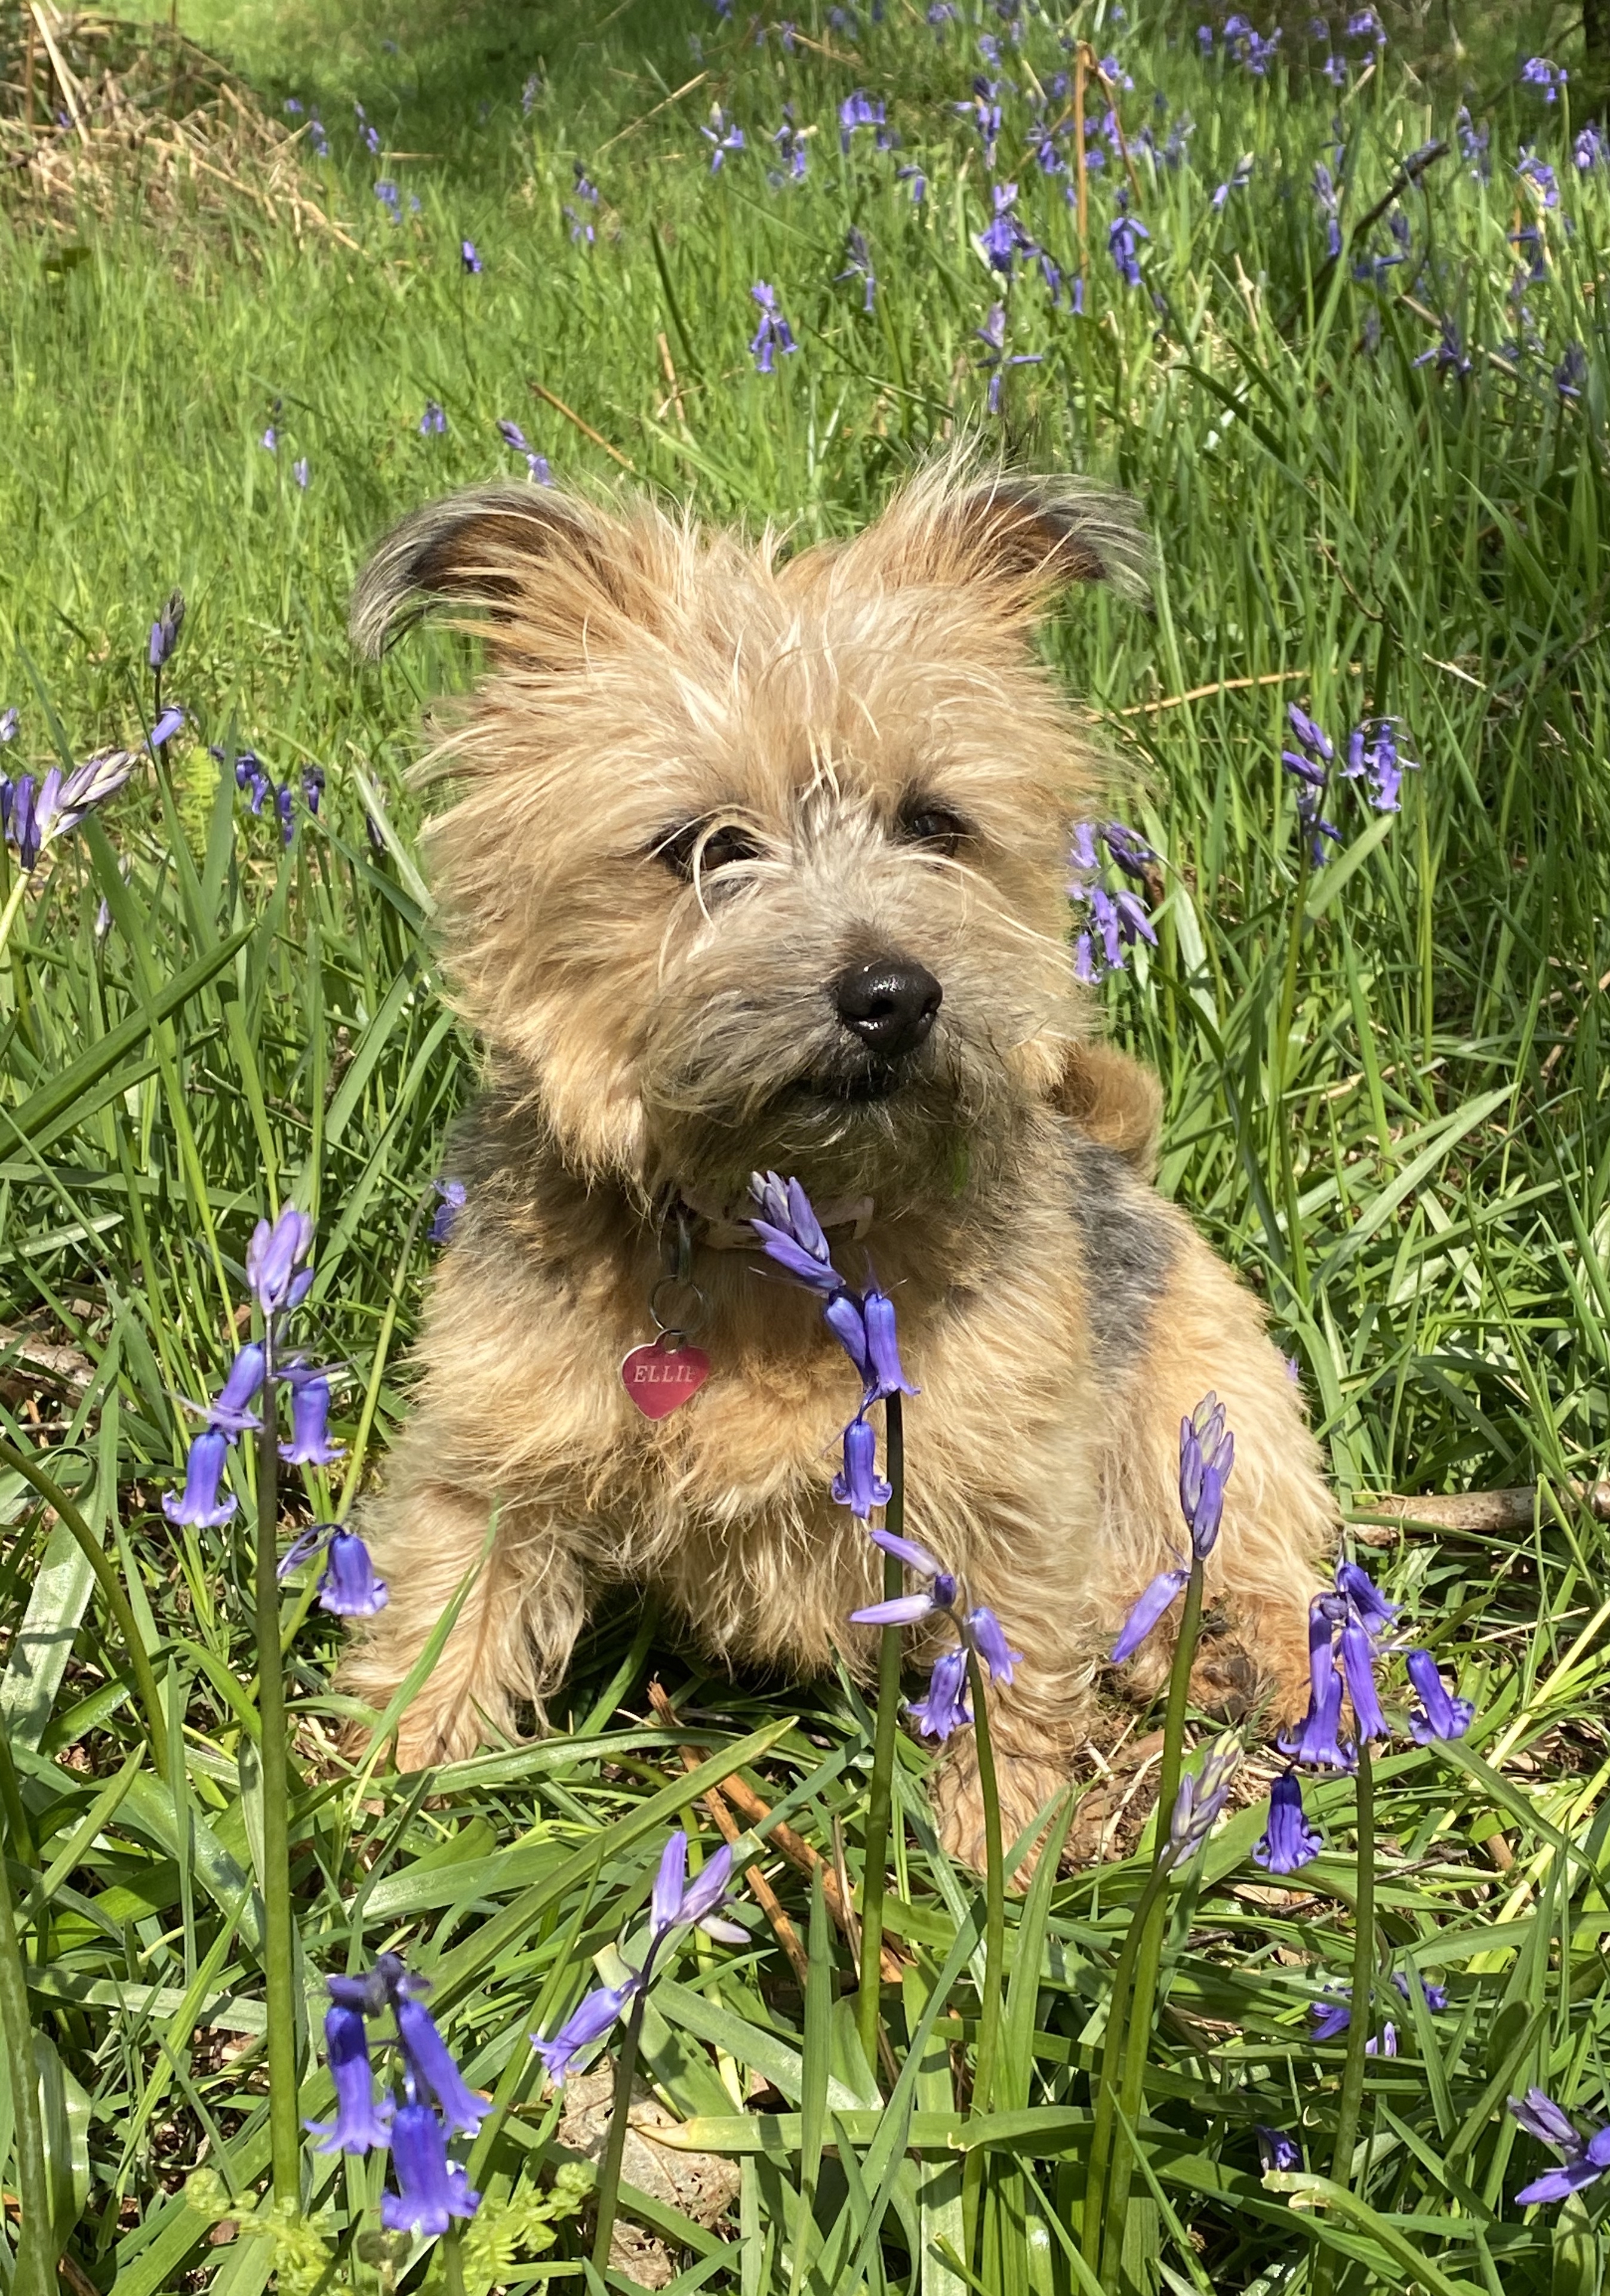 norfolk terrier or puppies - Dogs 